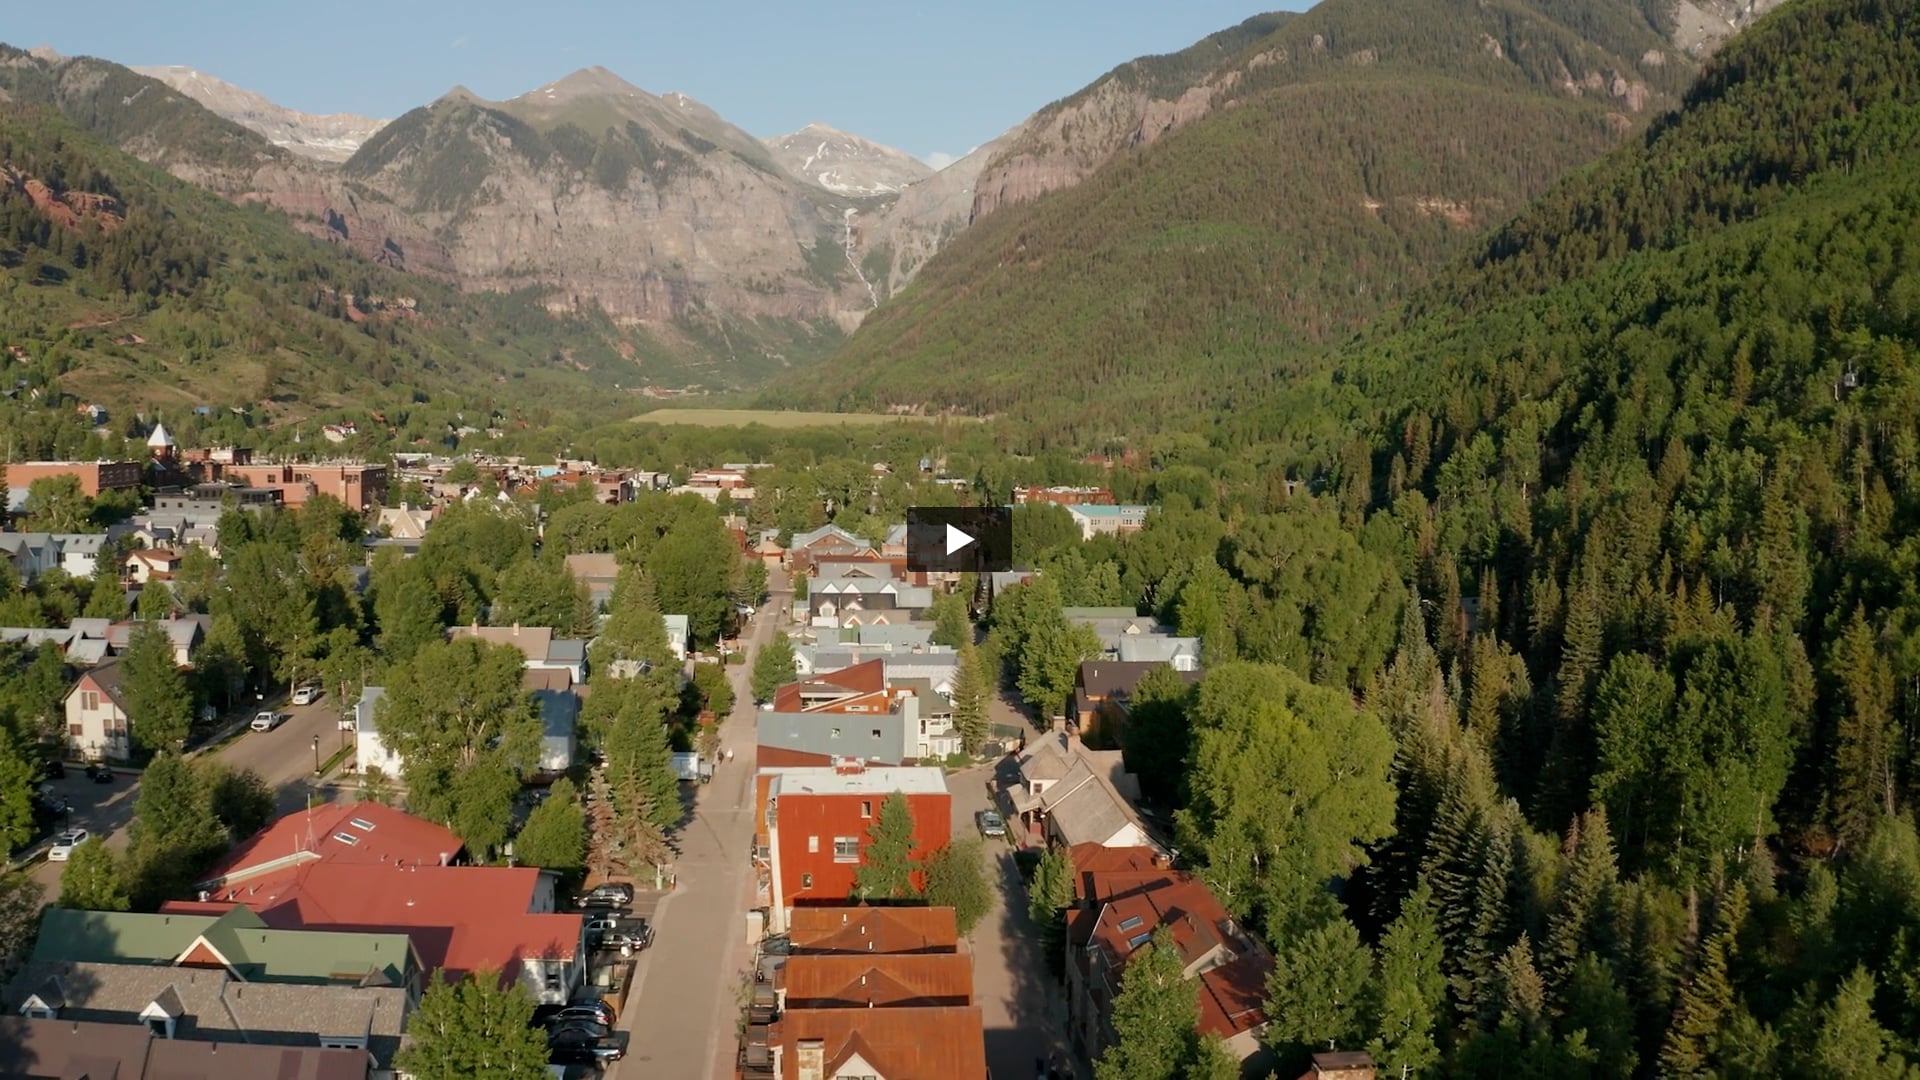 Exporting Science and Innovation from Telluride